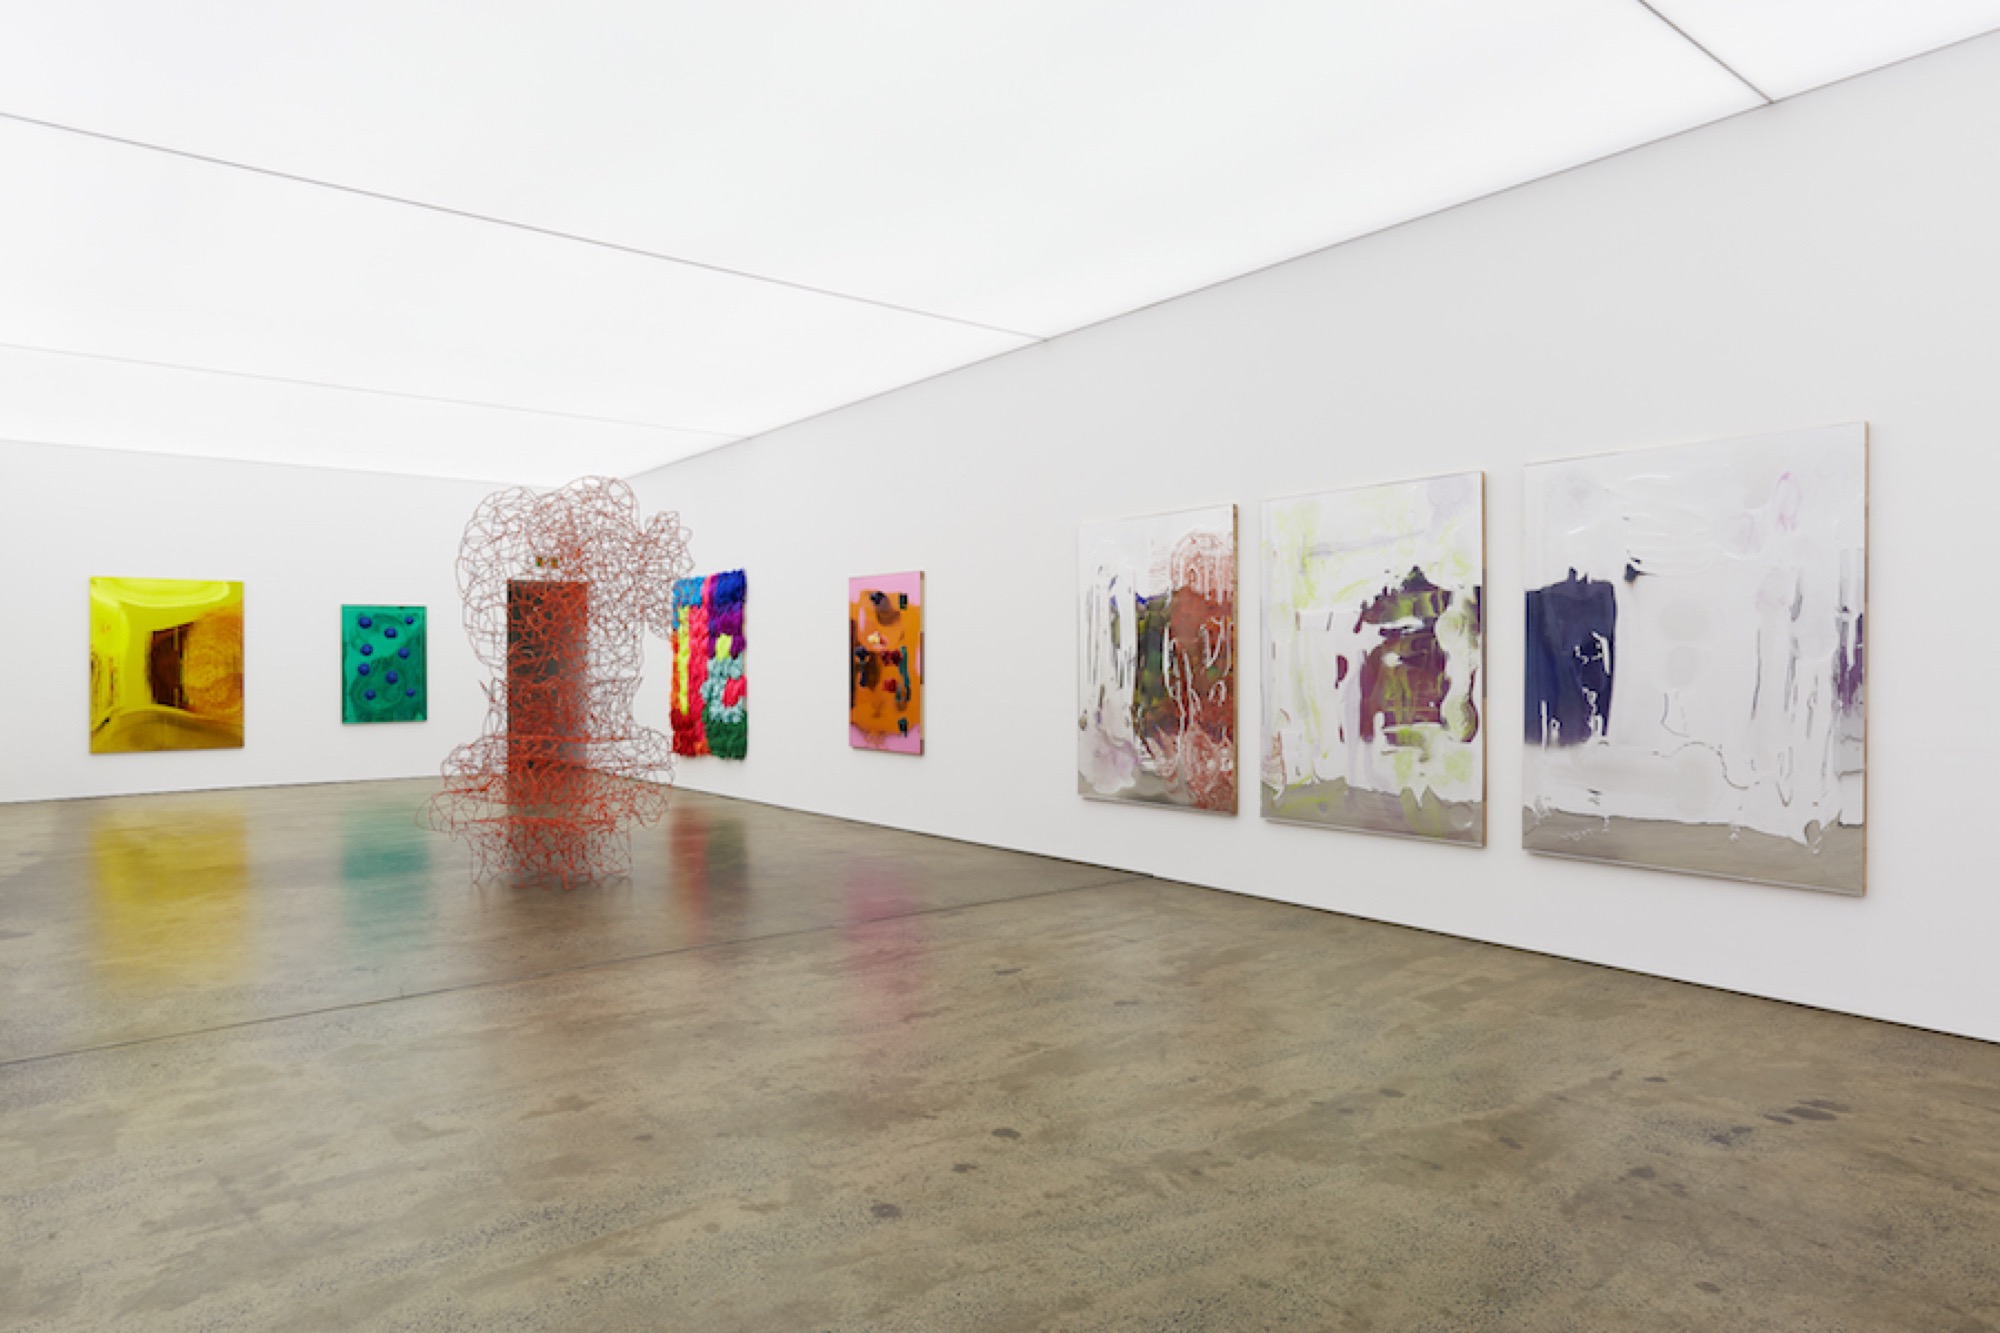 Dale Frank, installation view, 2017, Photography by Christo Crocker.